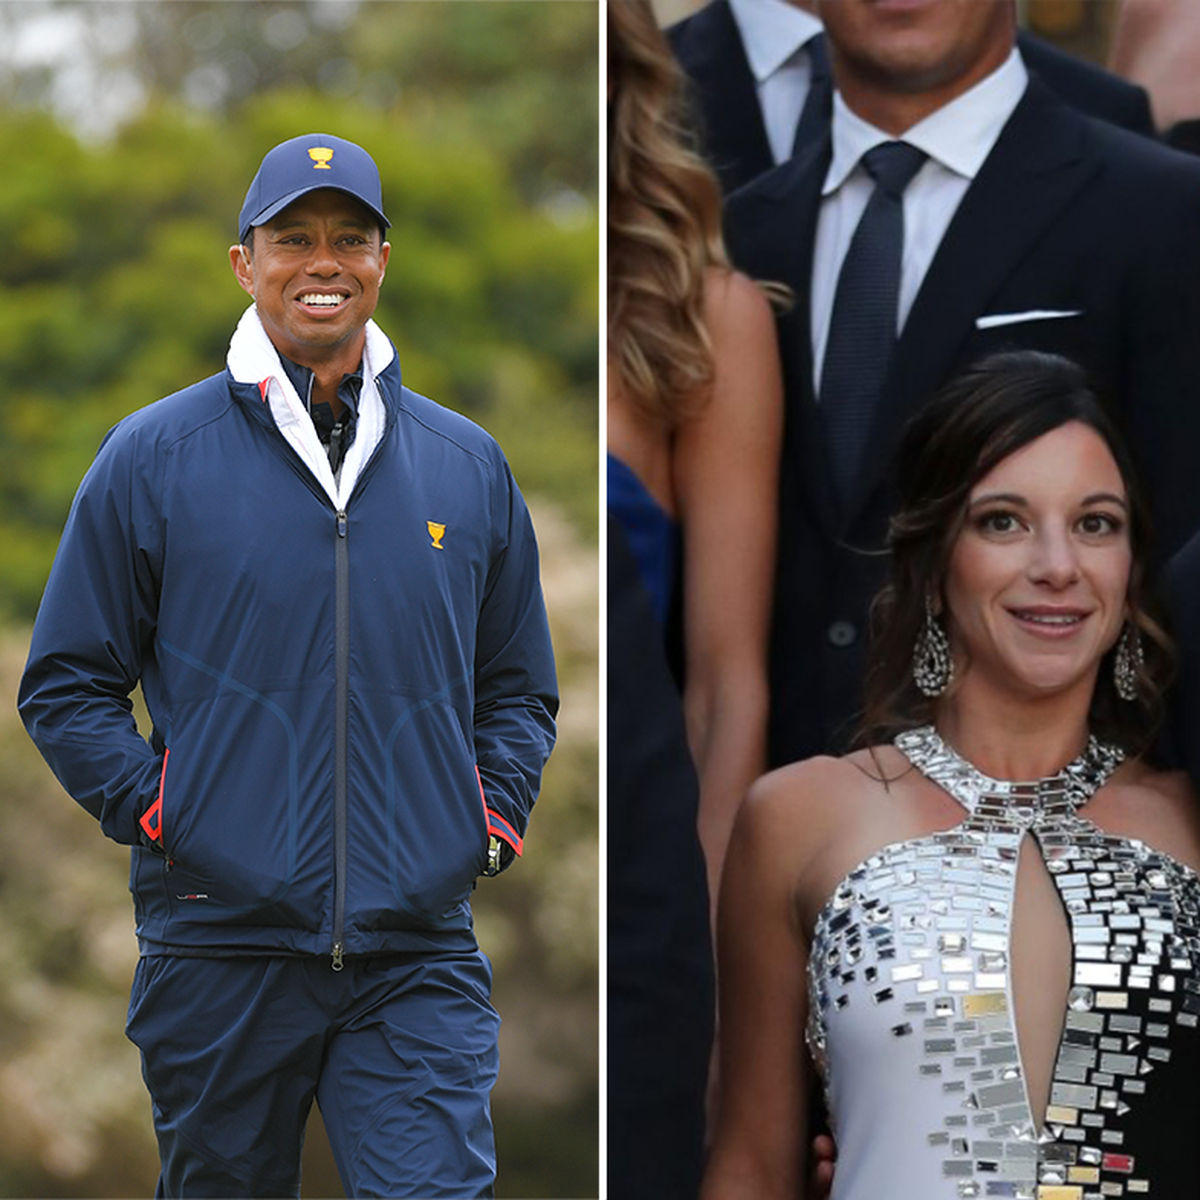 Tiger woods dating now